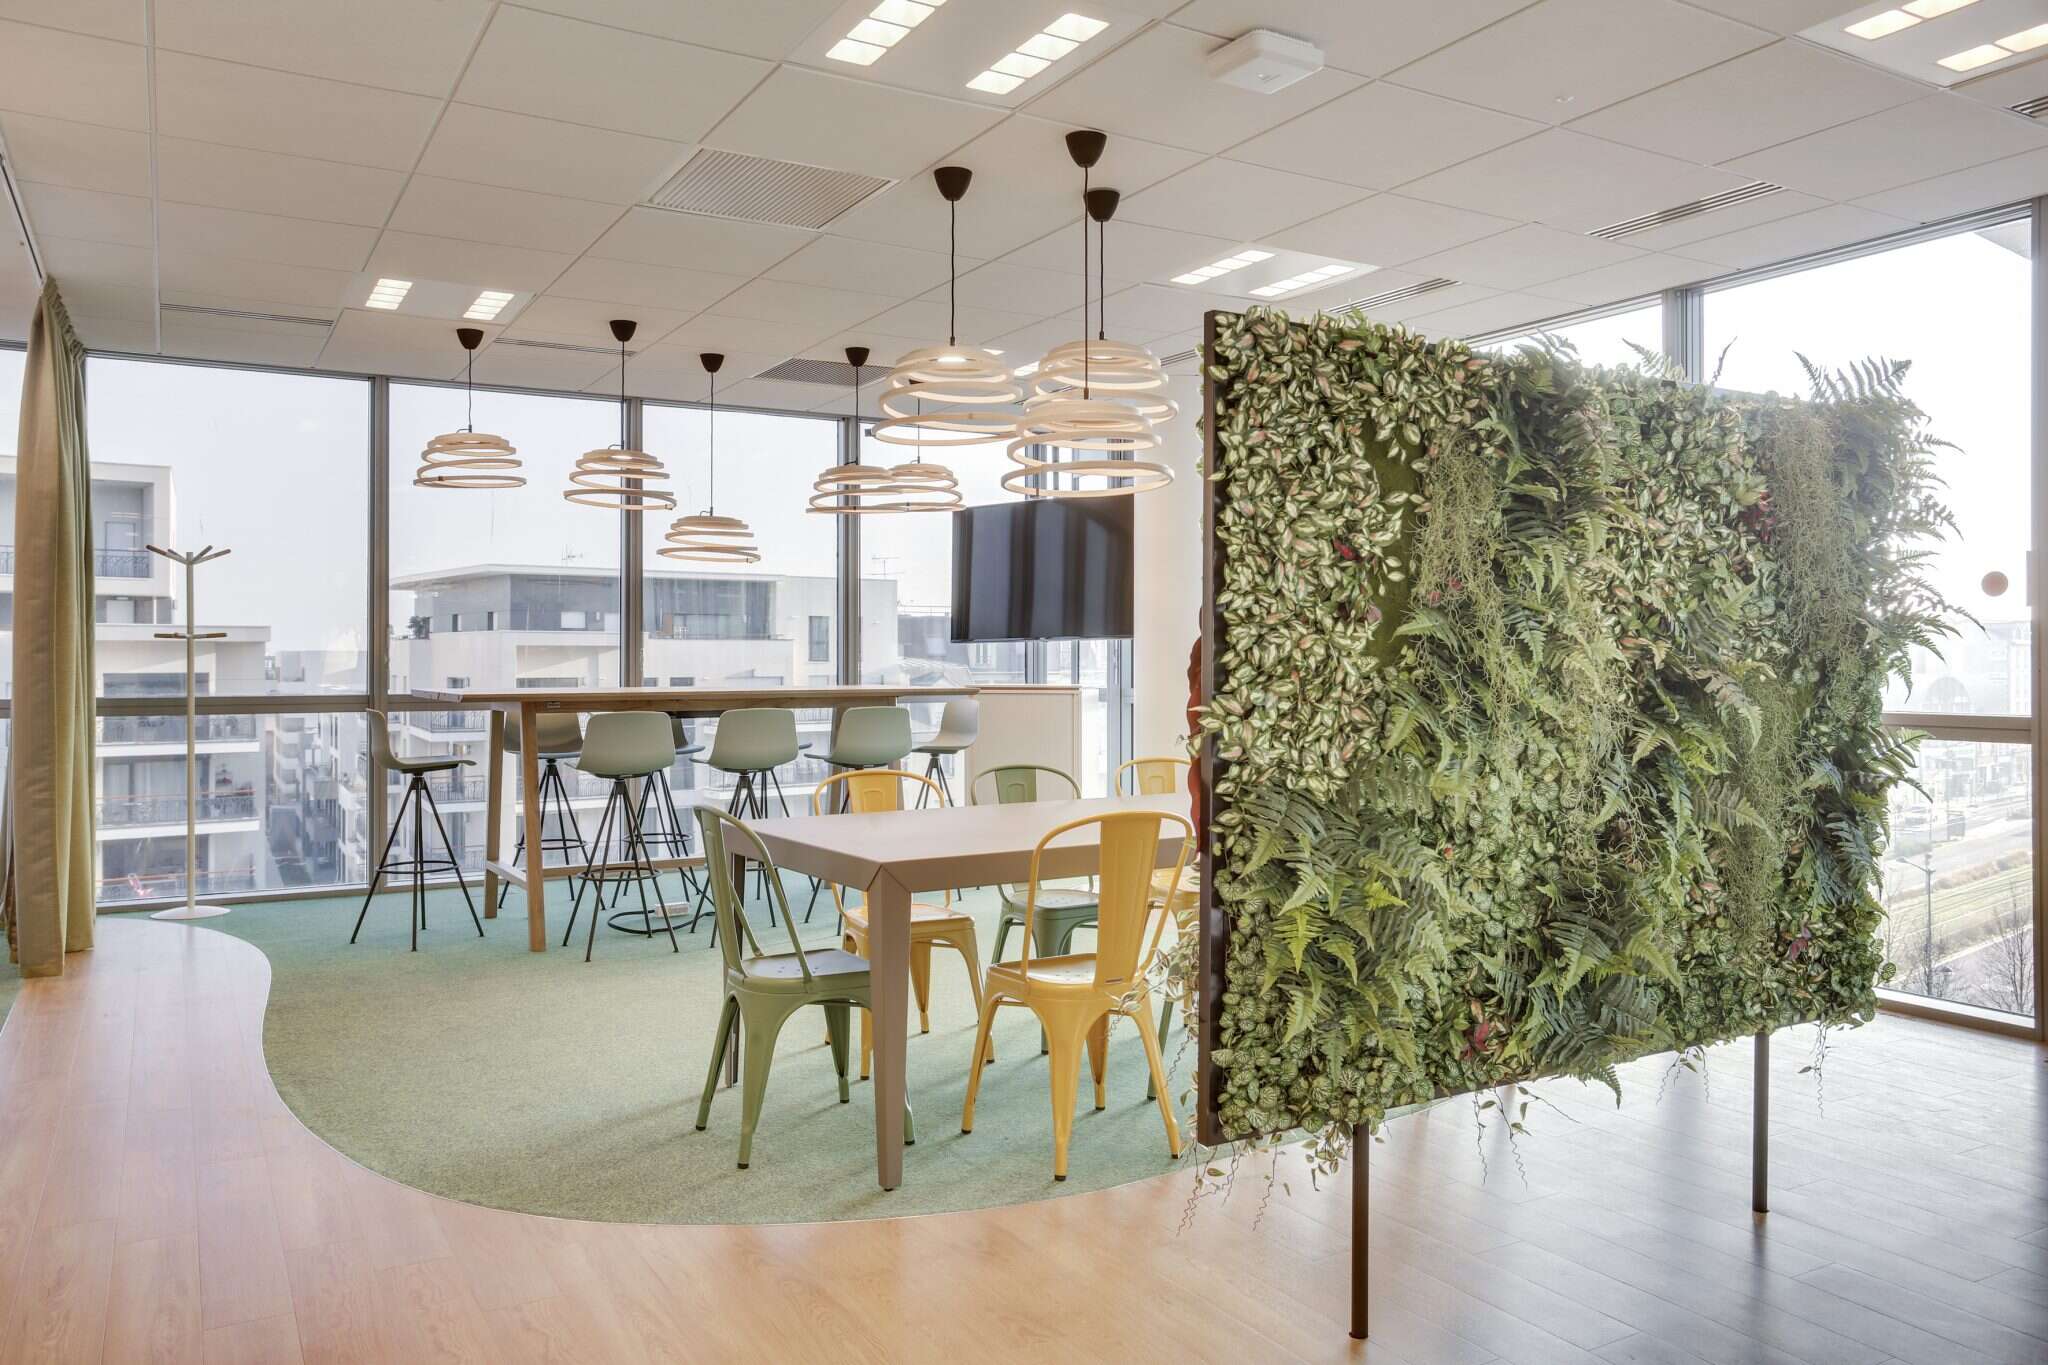 Natural light at PepsiCo’s offices in Colombes, France